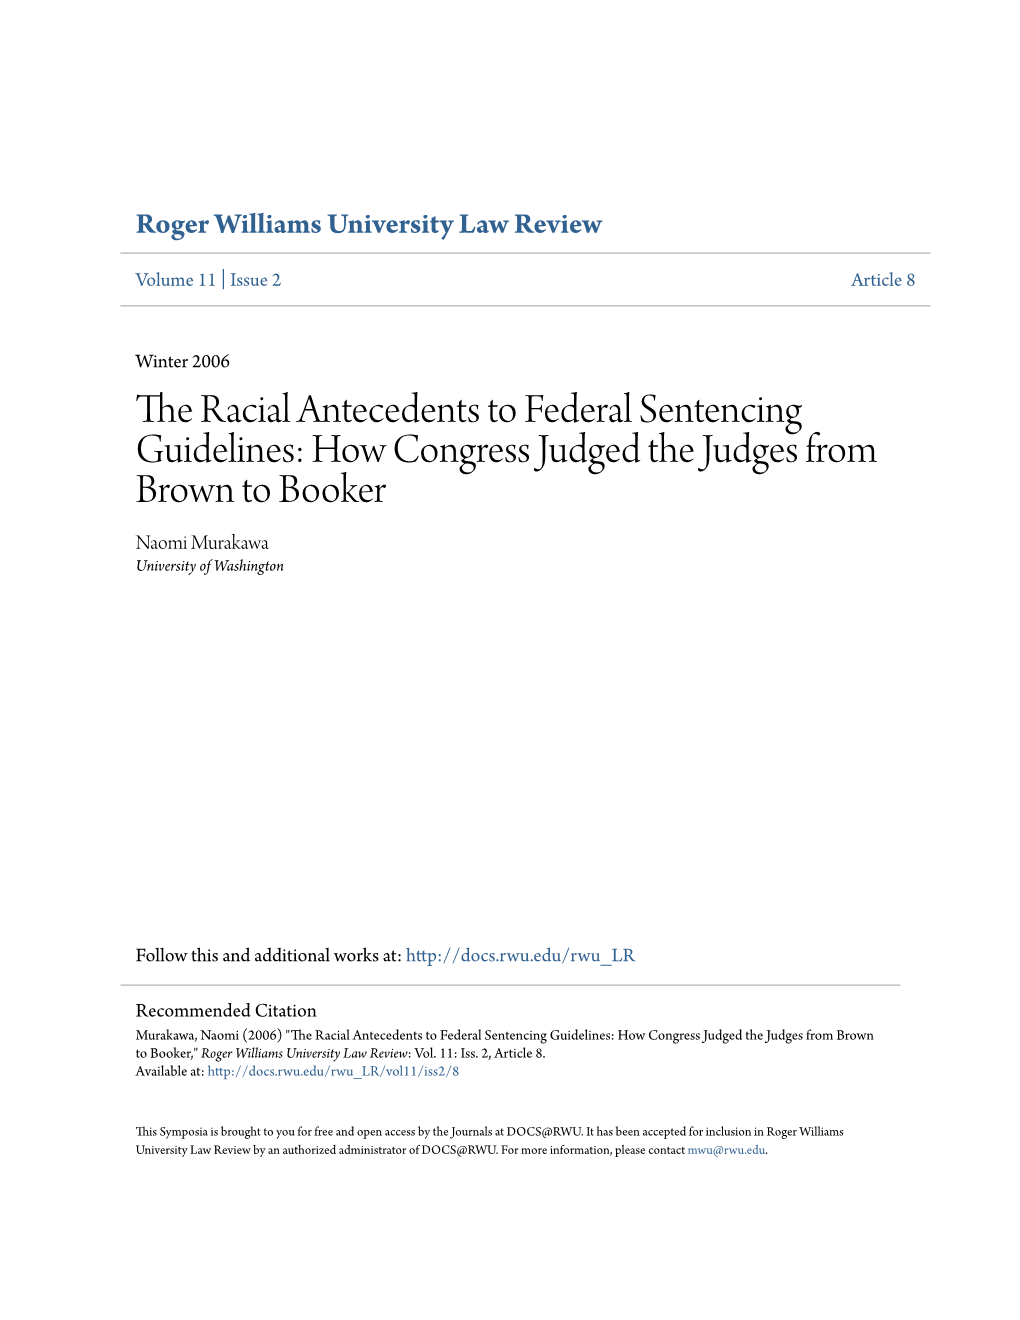 The Racial Antecedents to Federal Sentencing Guidelines: How Congress Judged the Judges from Brown to Booker Naomi Murakawa University of Washington